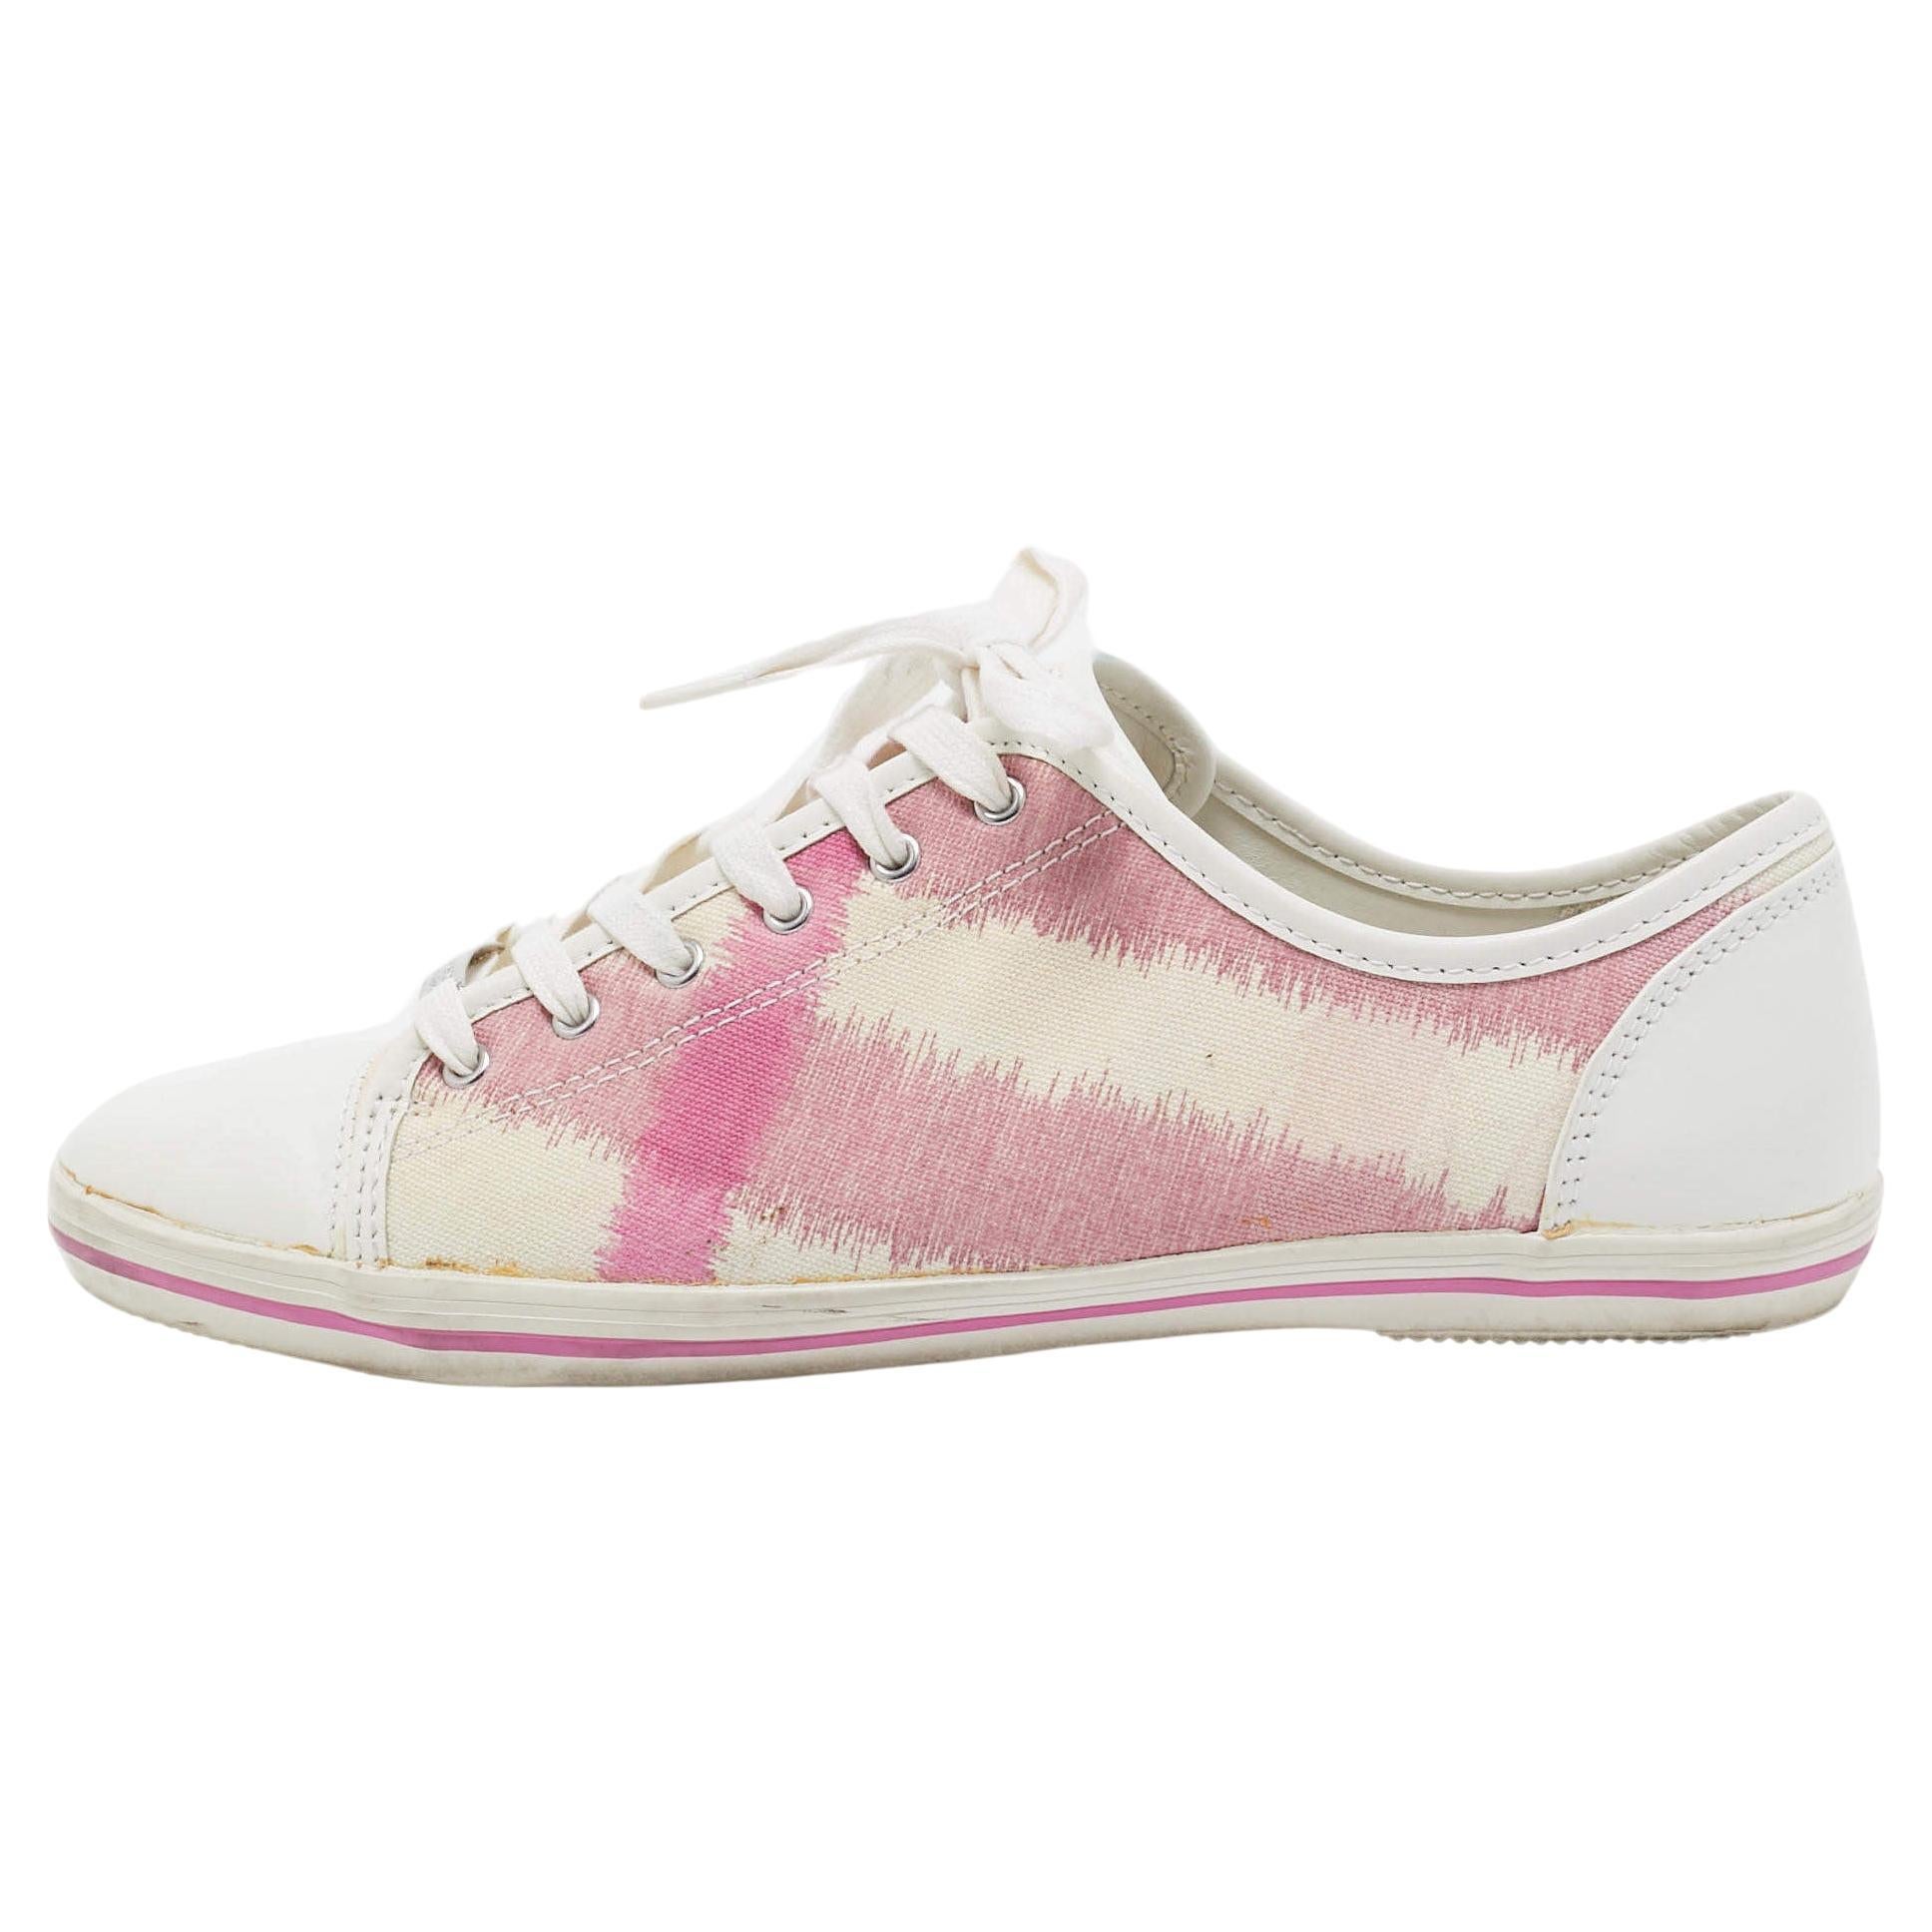 Burberry Pink/White Leather and Canvas Cap Toe Low Top Sneakers Size 41 For Sale